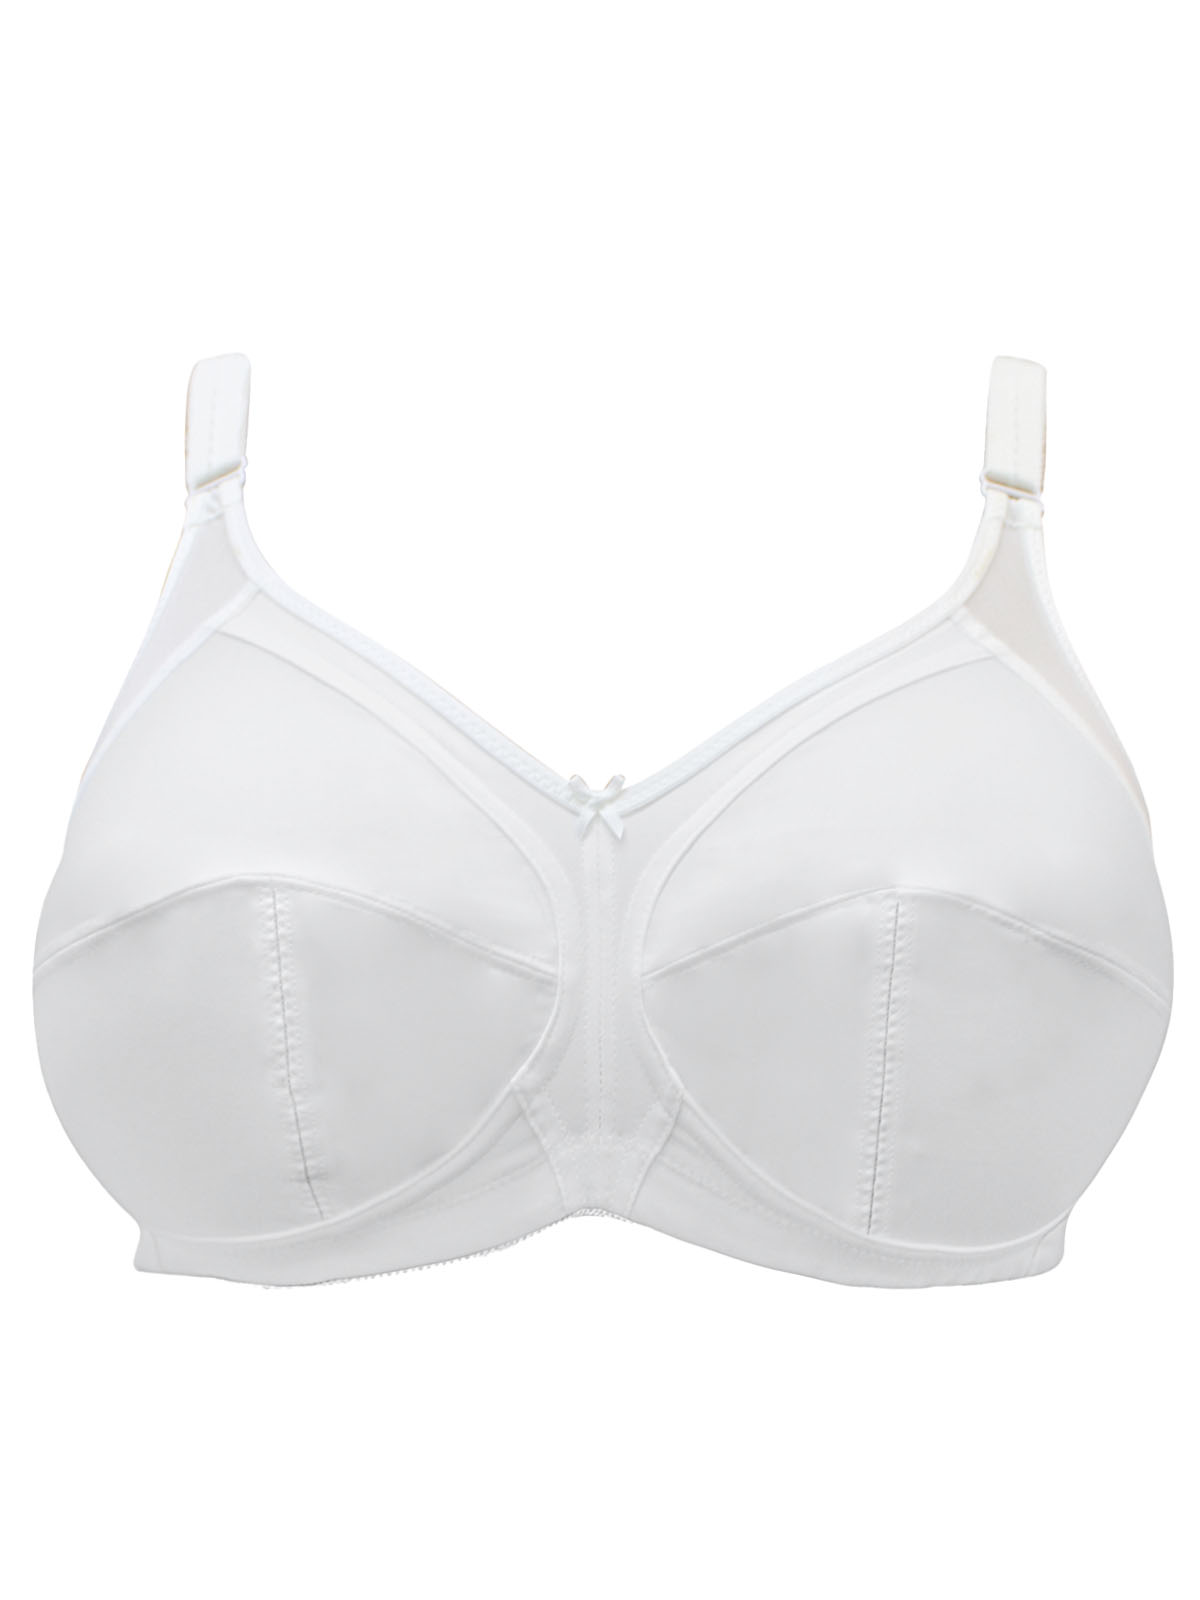 DUNNES 34D PADDED Bras Underwired Supportive Comfortable Soft Bra RE39:01  -02 £8.99 - PicClick UK